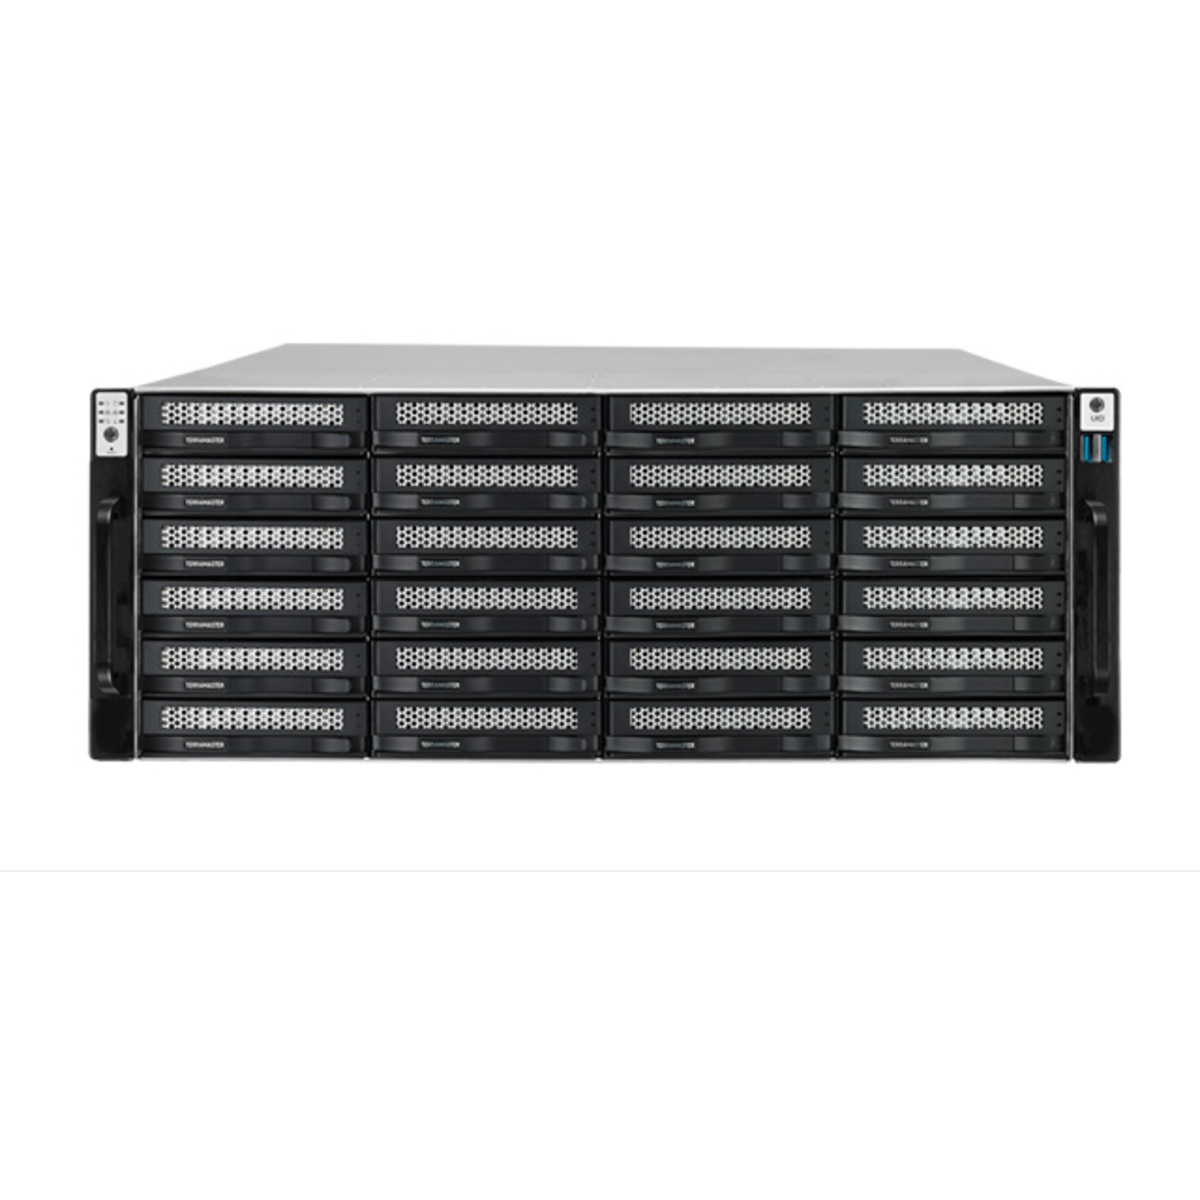 TerraMaster U24-722-2224 480tb 24-Bay RackMount Large Business / Enterprise NAS - Network Attached Storage Device 24x20tb Western Digital Red Pro WD201KFGX 3.5 7200rpm SATA 6Gb/s HDD NAS Class Drives Installed - Burn-In Tested U24-722-2224